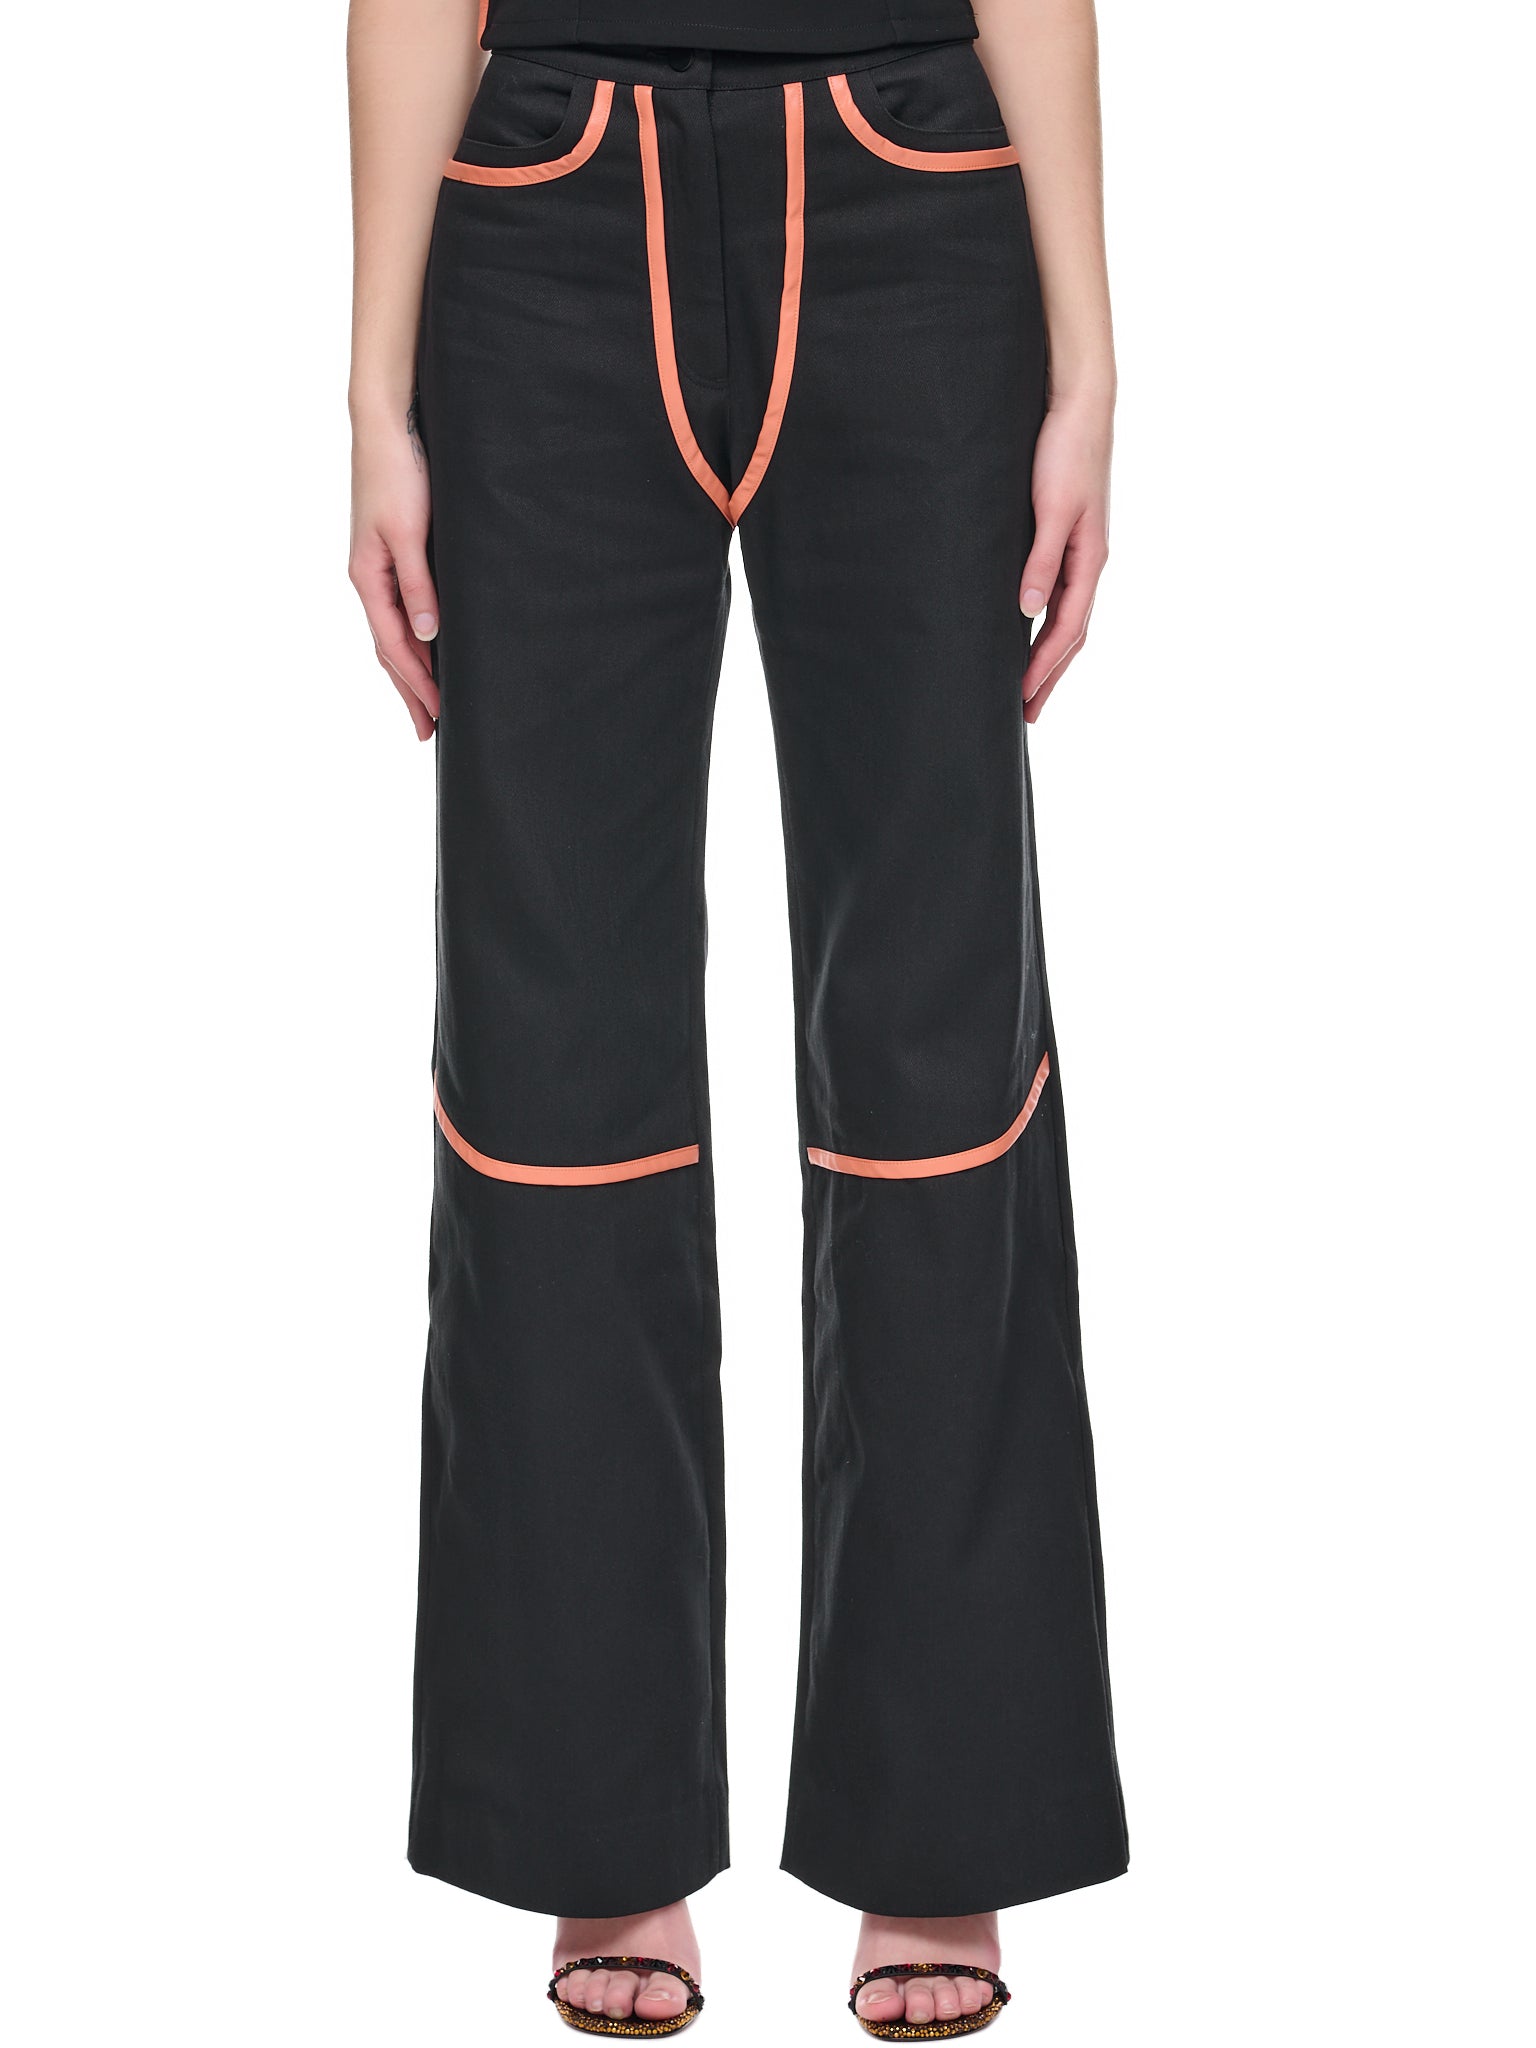 Rodeo Jeans (PG328-RODEO-BLACK-CORAL)